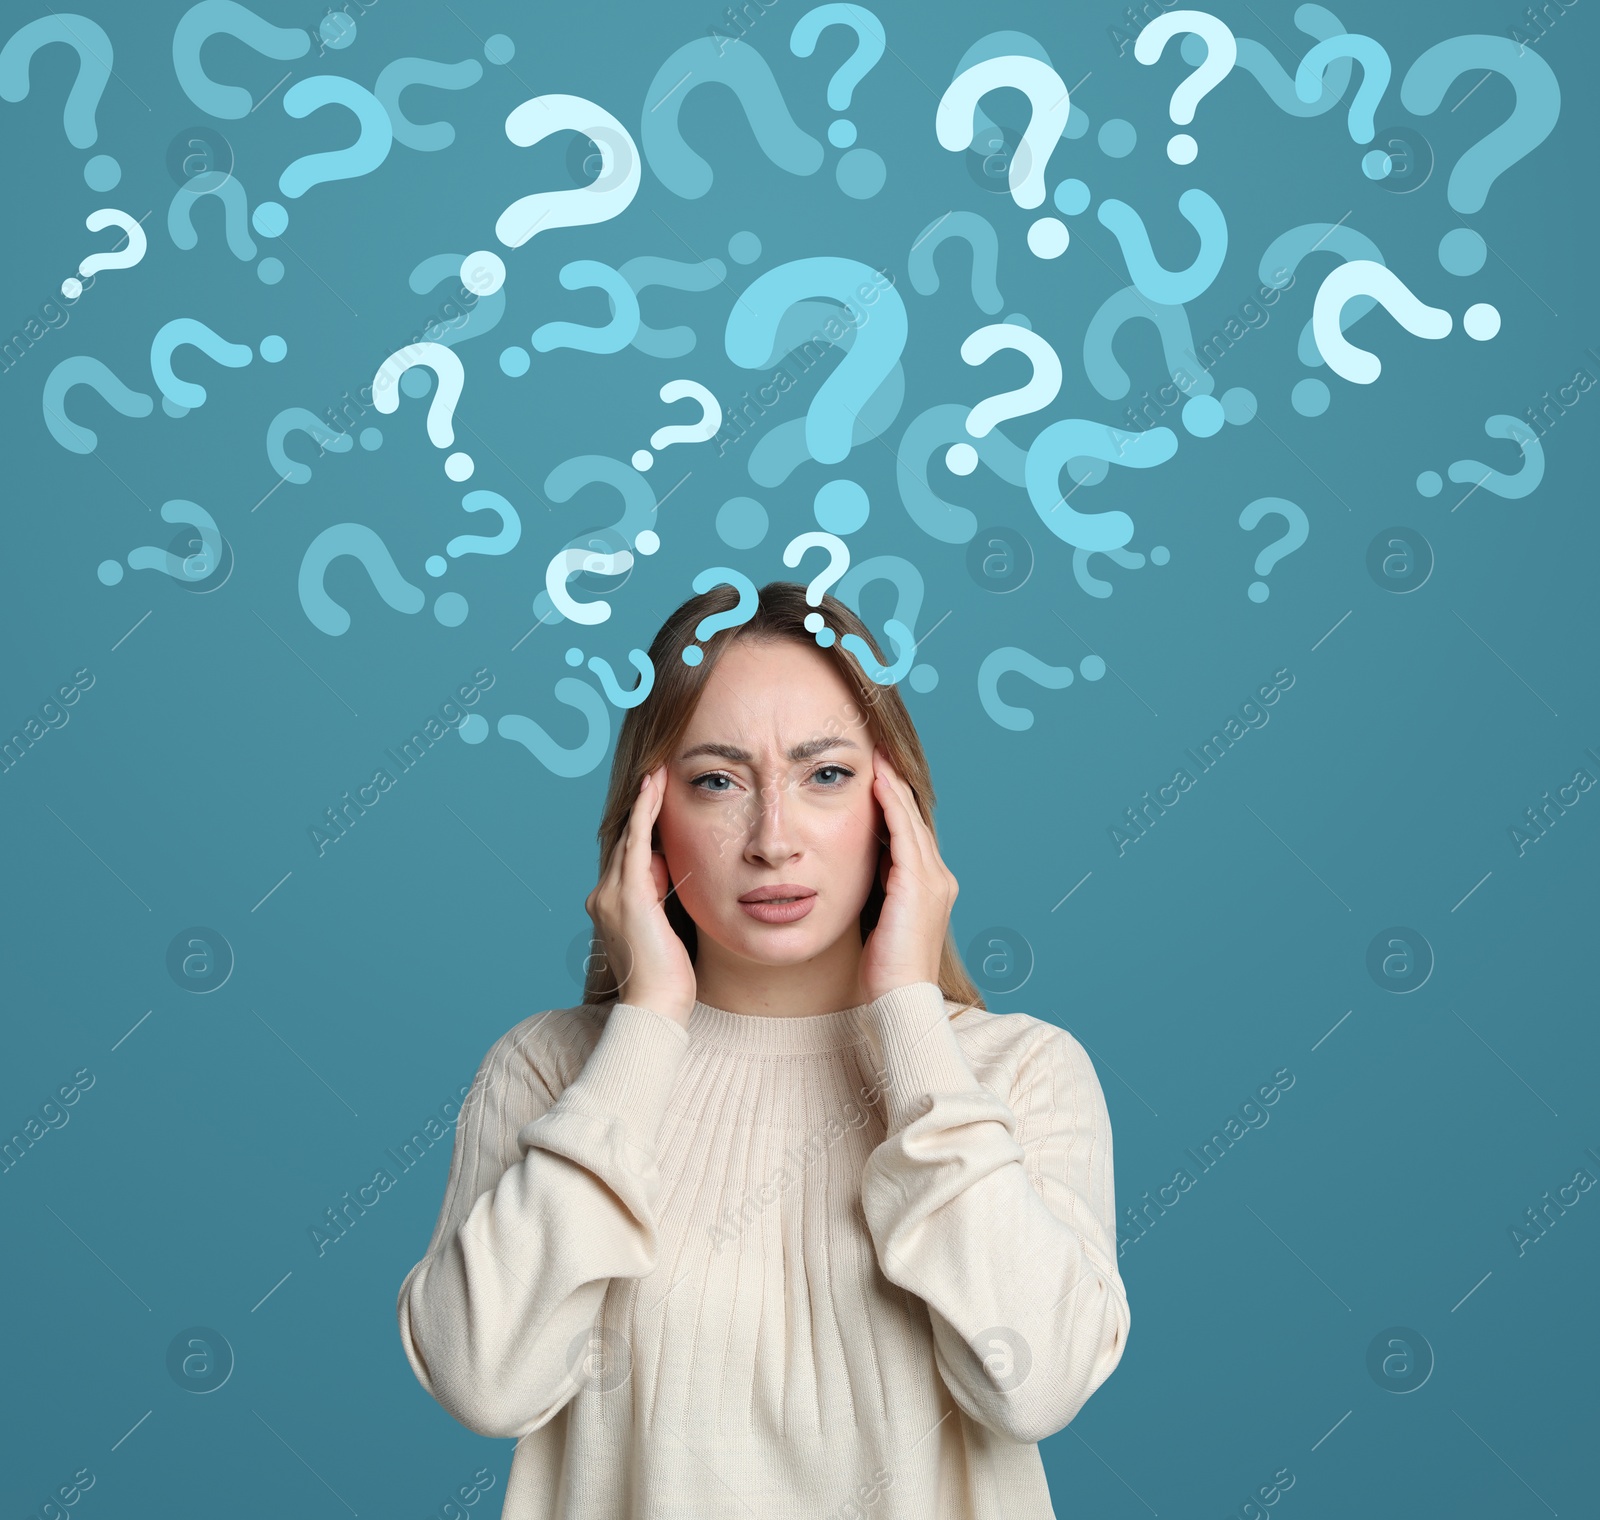 Image of Amnesia concept. Woman trying to remember something on color background. Flow of question marks symbolizing memory loss